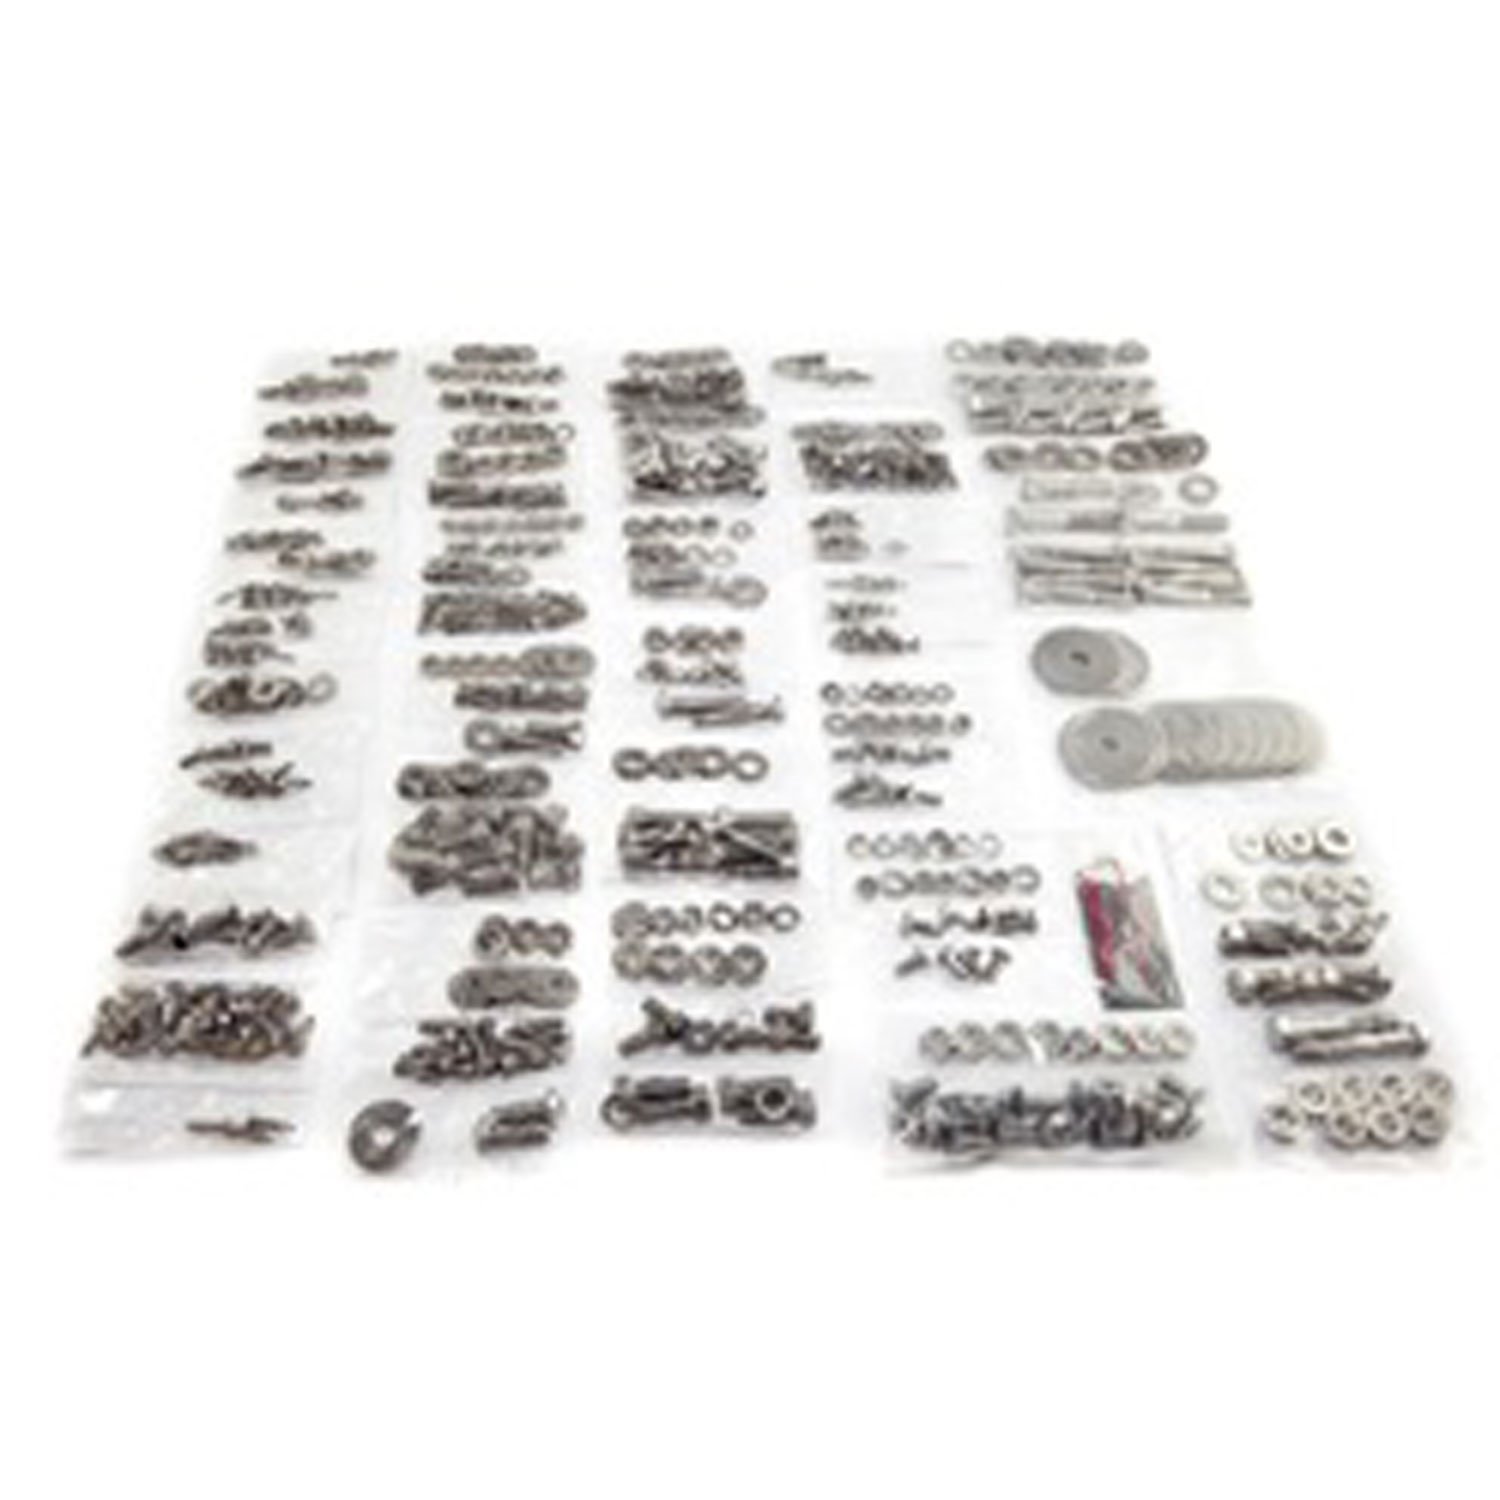 This 620 piece stainless steel body fastener kit from Omix-ADA gives you all the fasteners to rebuil